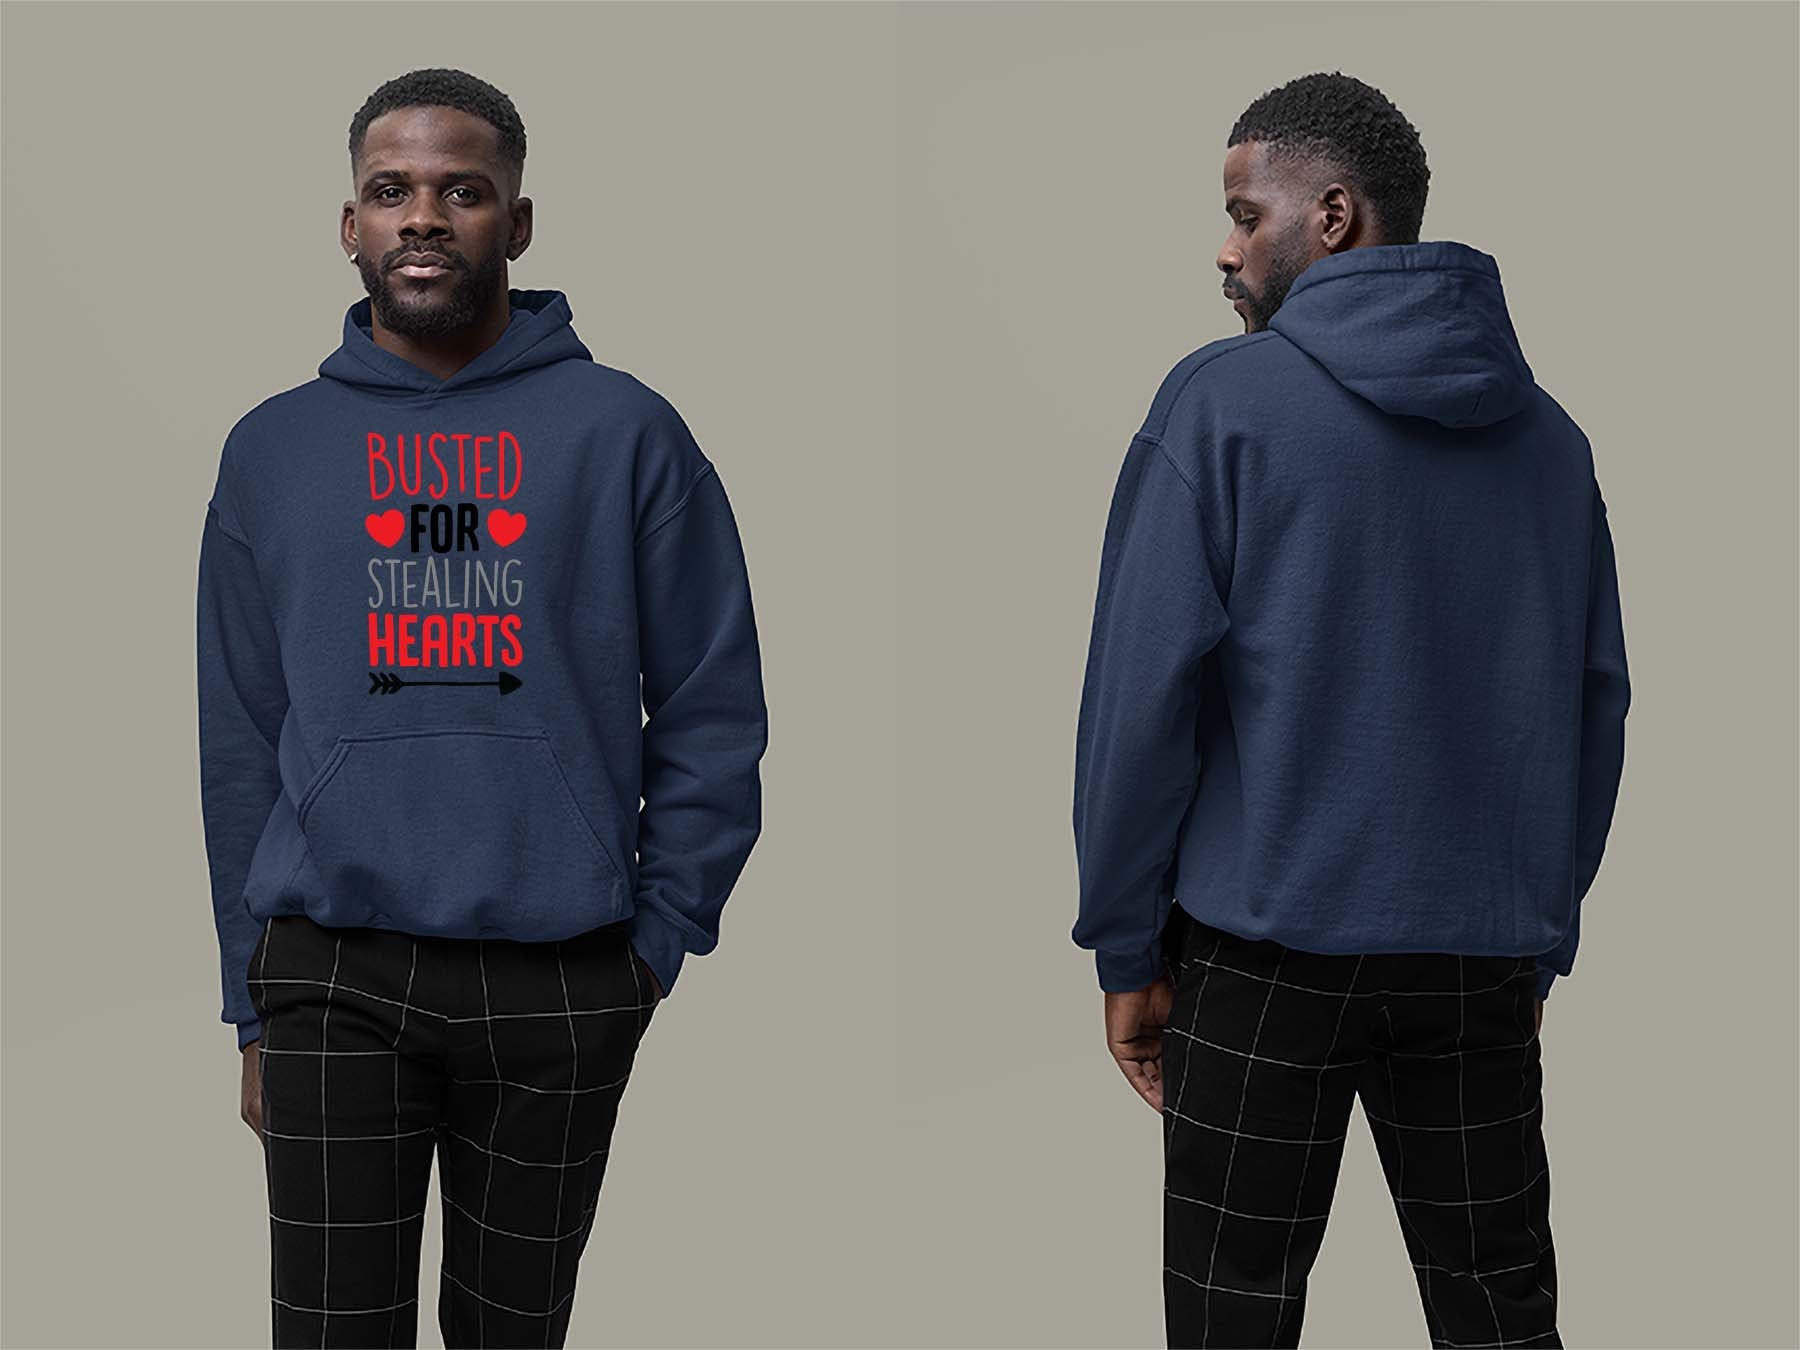 Fat Dave Busted For Stealing Hearts Hoodie Small Navy